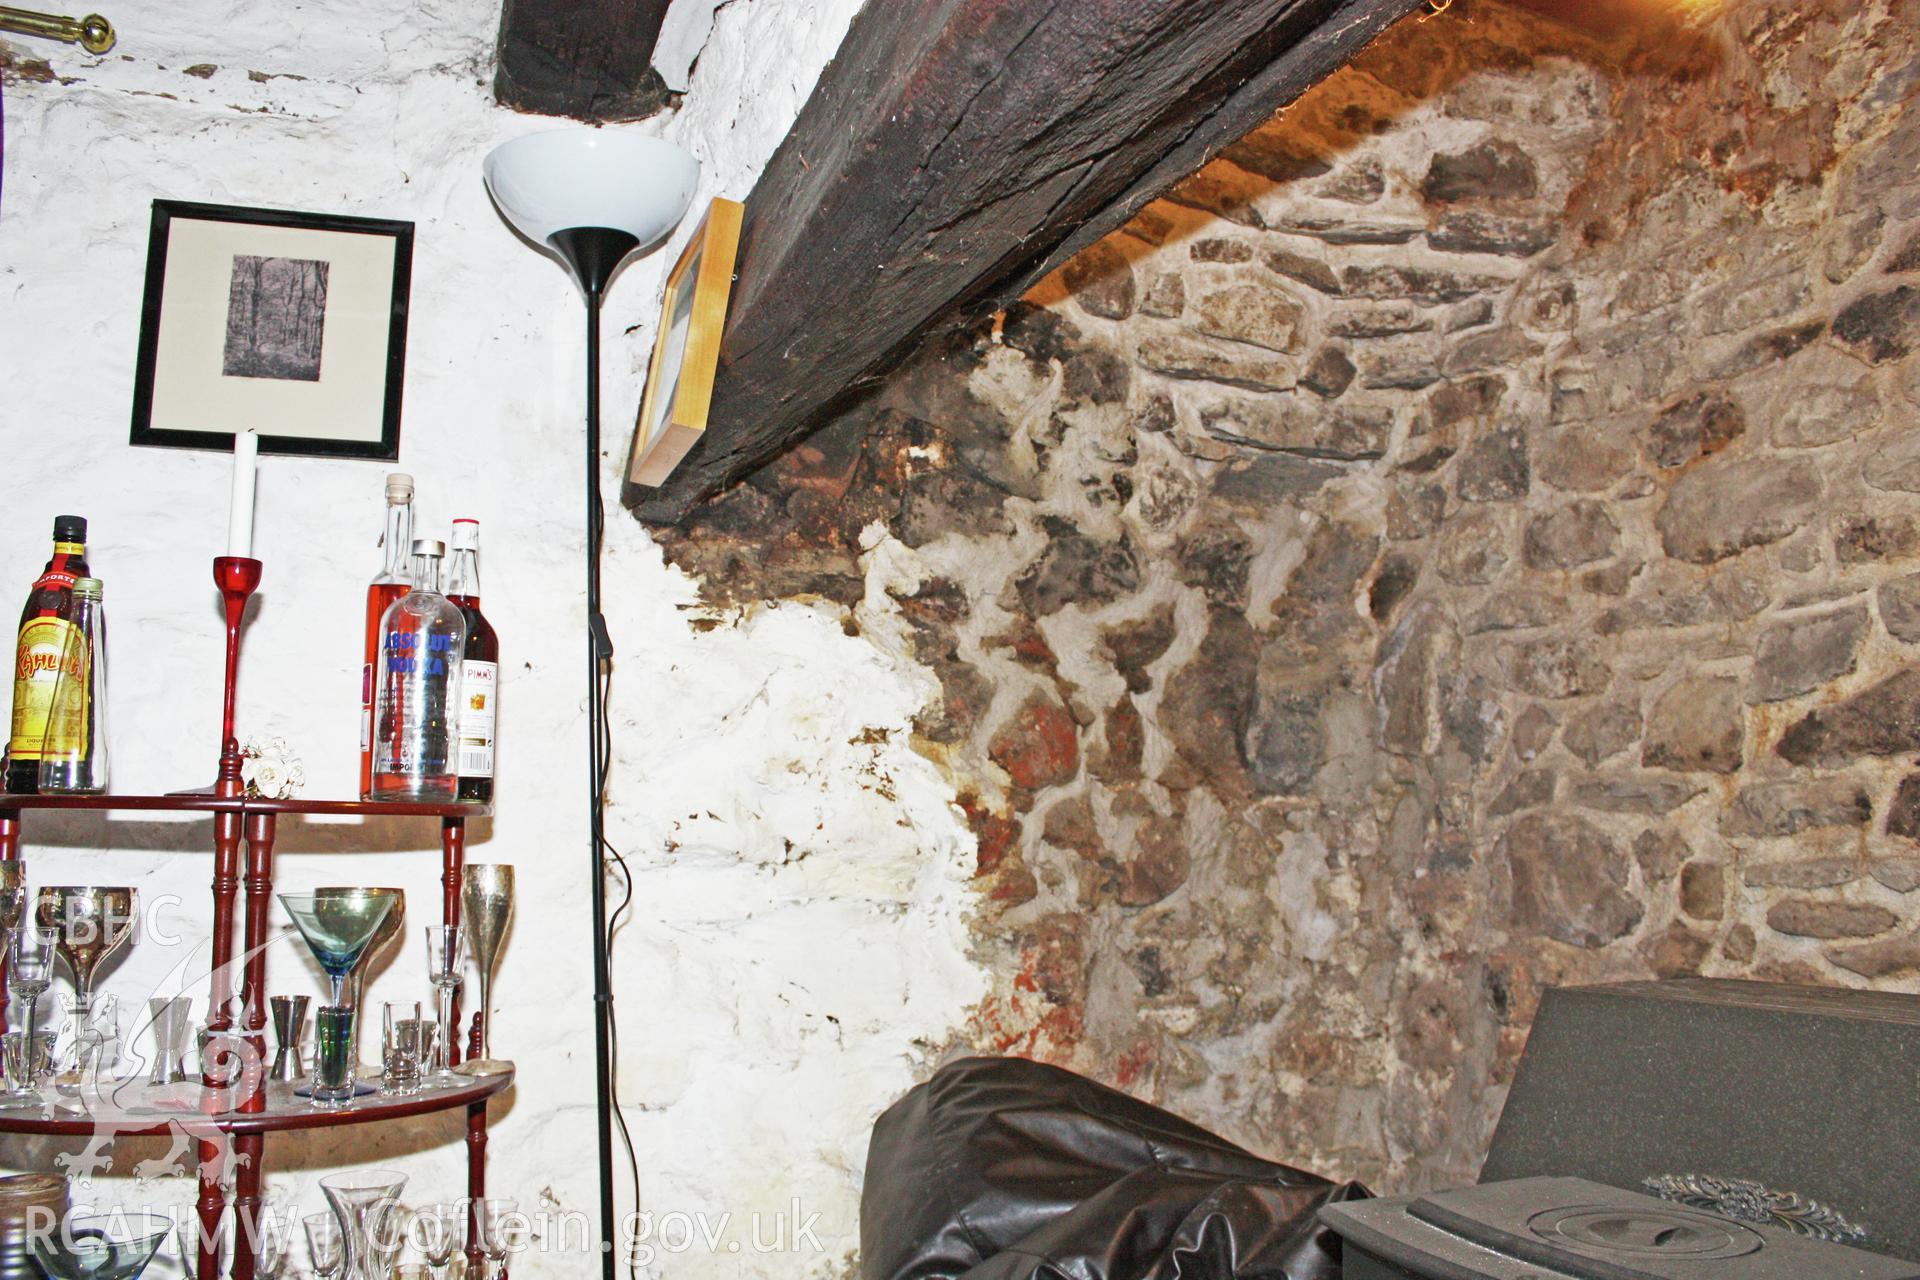 Glantywi House bakehouse, interior view, fireplace detail.